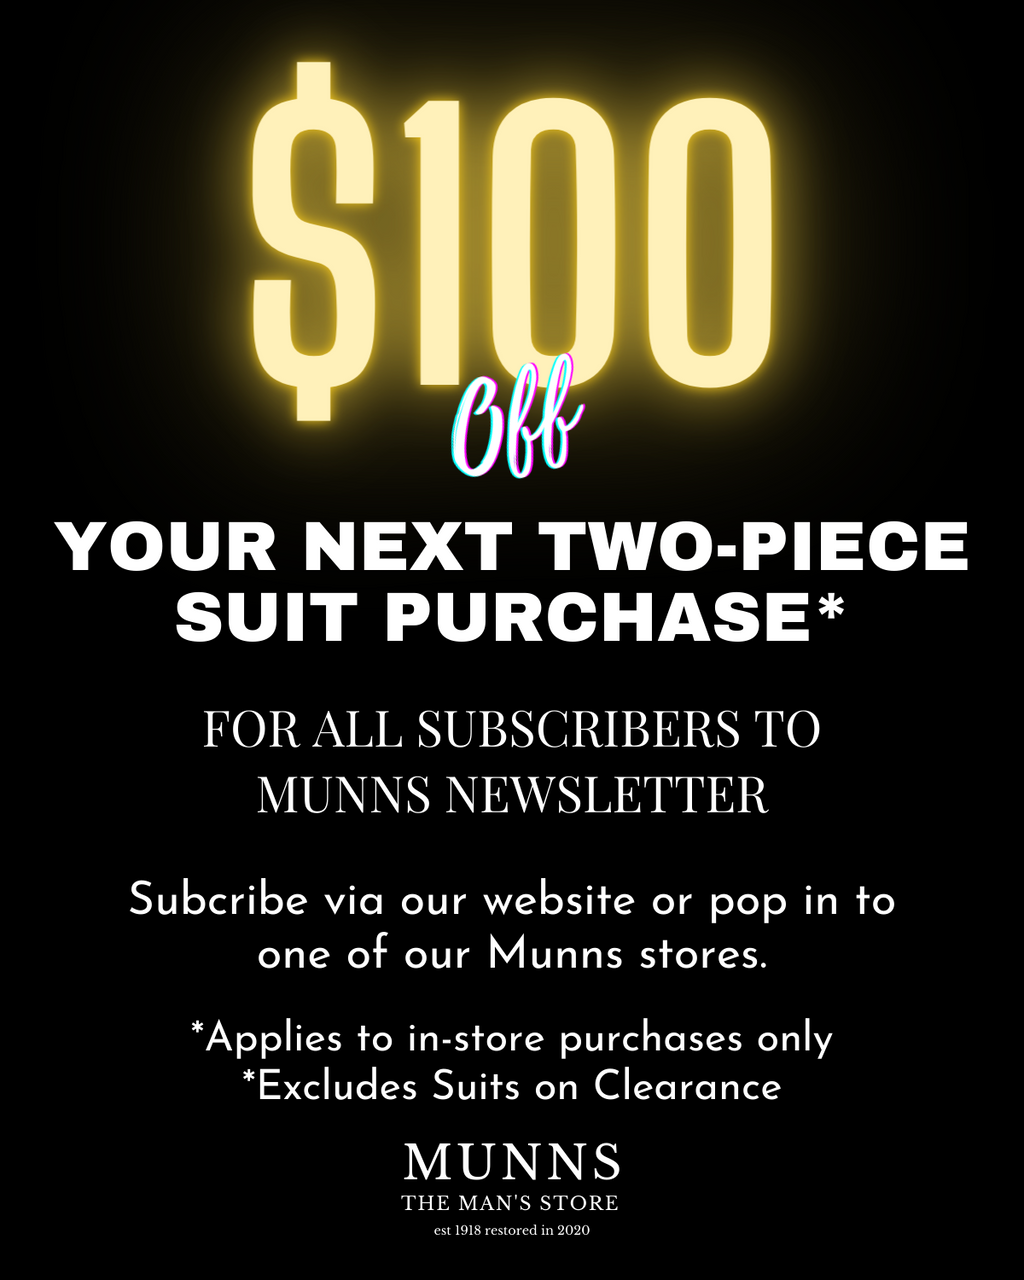 $100 Discount on Next Two-piece Suit Purchase - Newsletter Subscribers Only